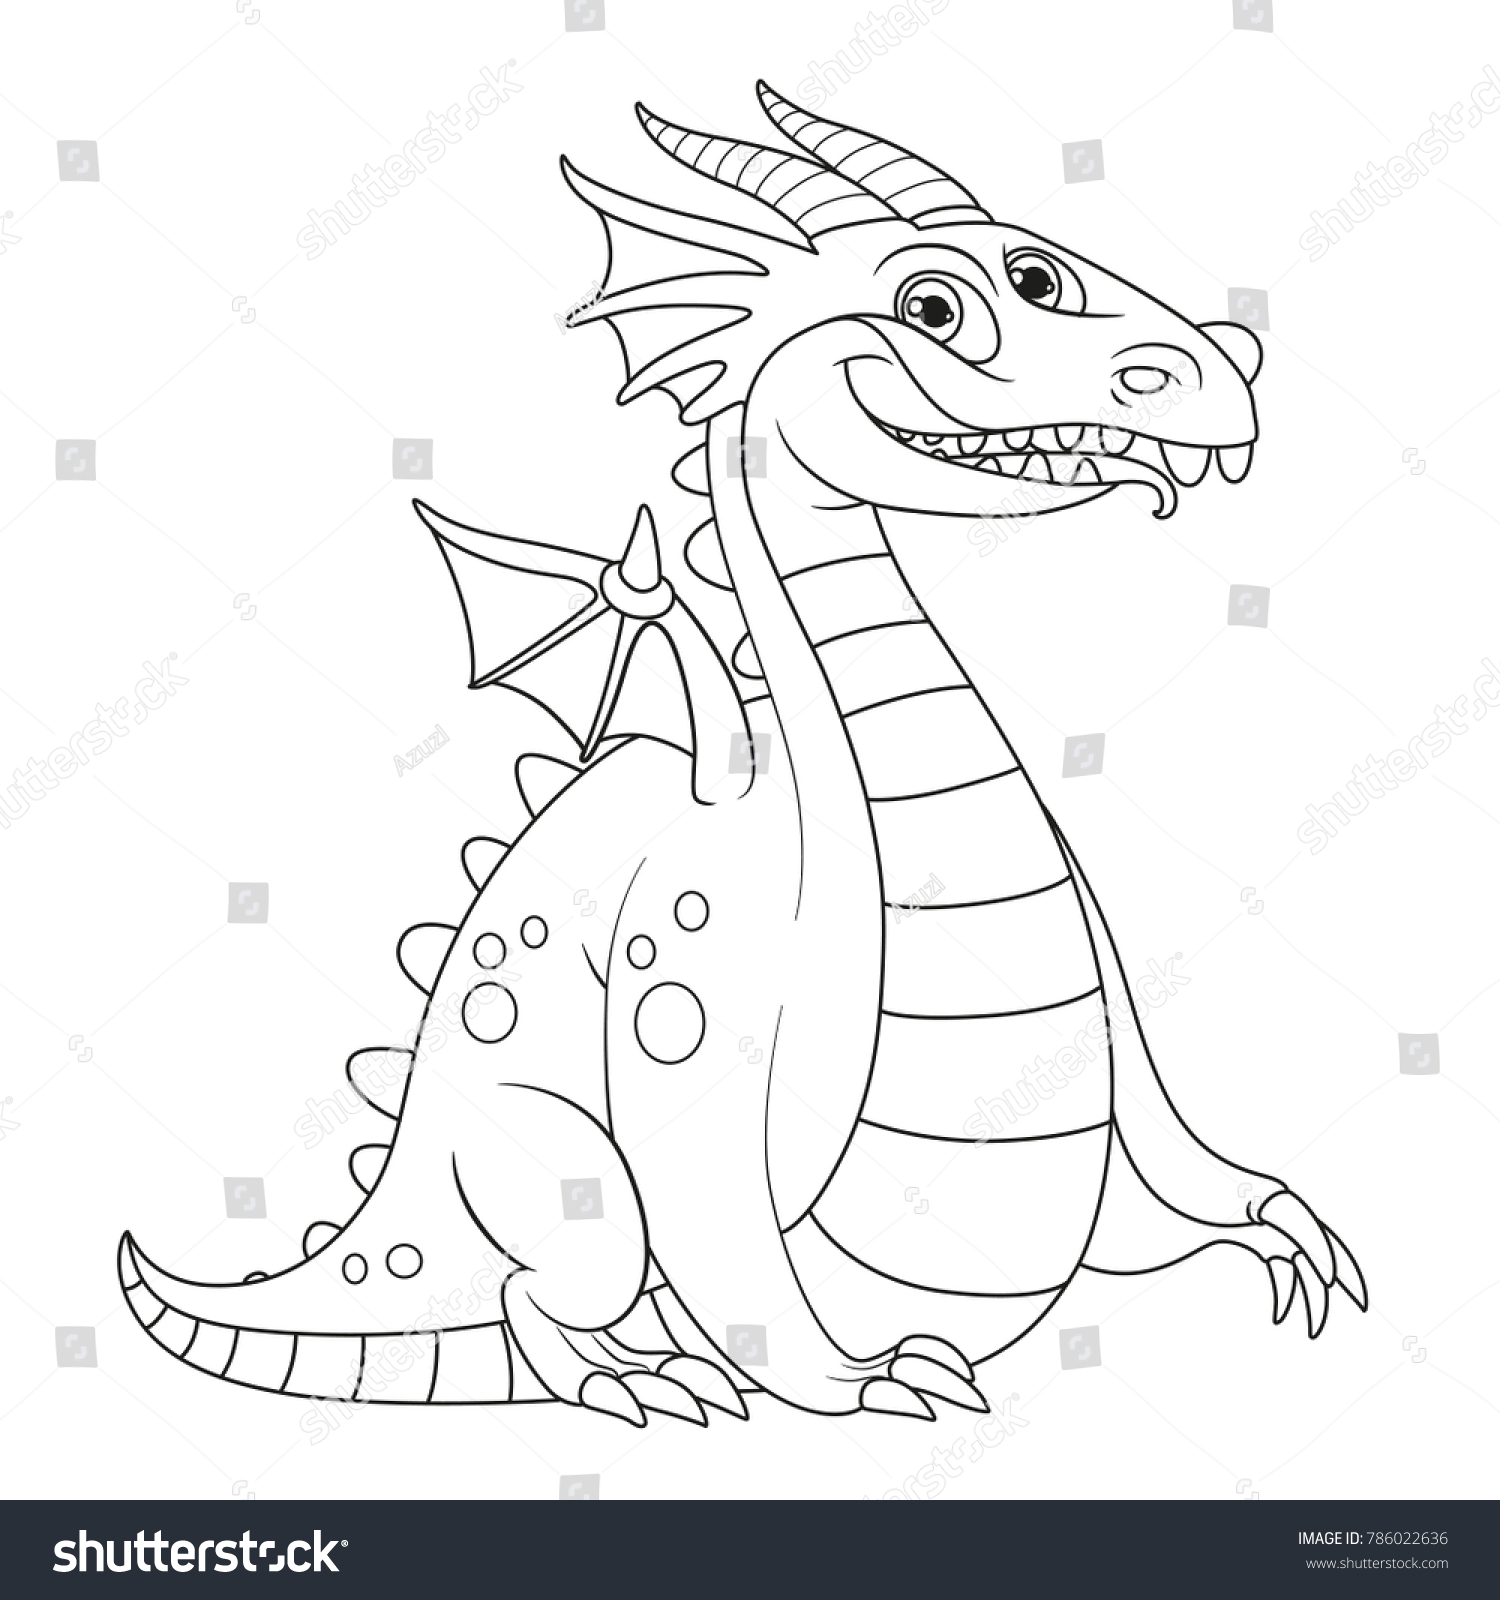 Cheerful Fat Dragon Little Wings Outlines Stock Vector (Royalty Free ...